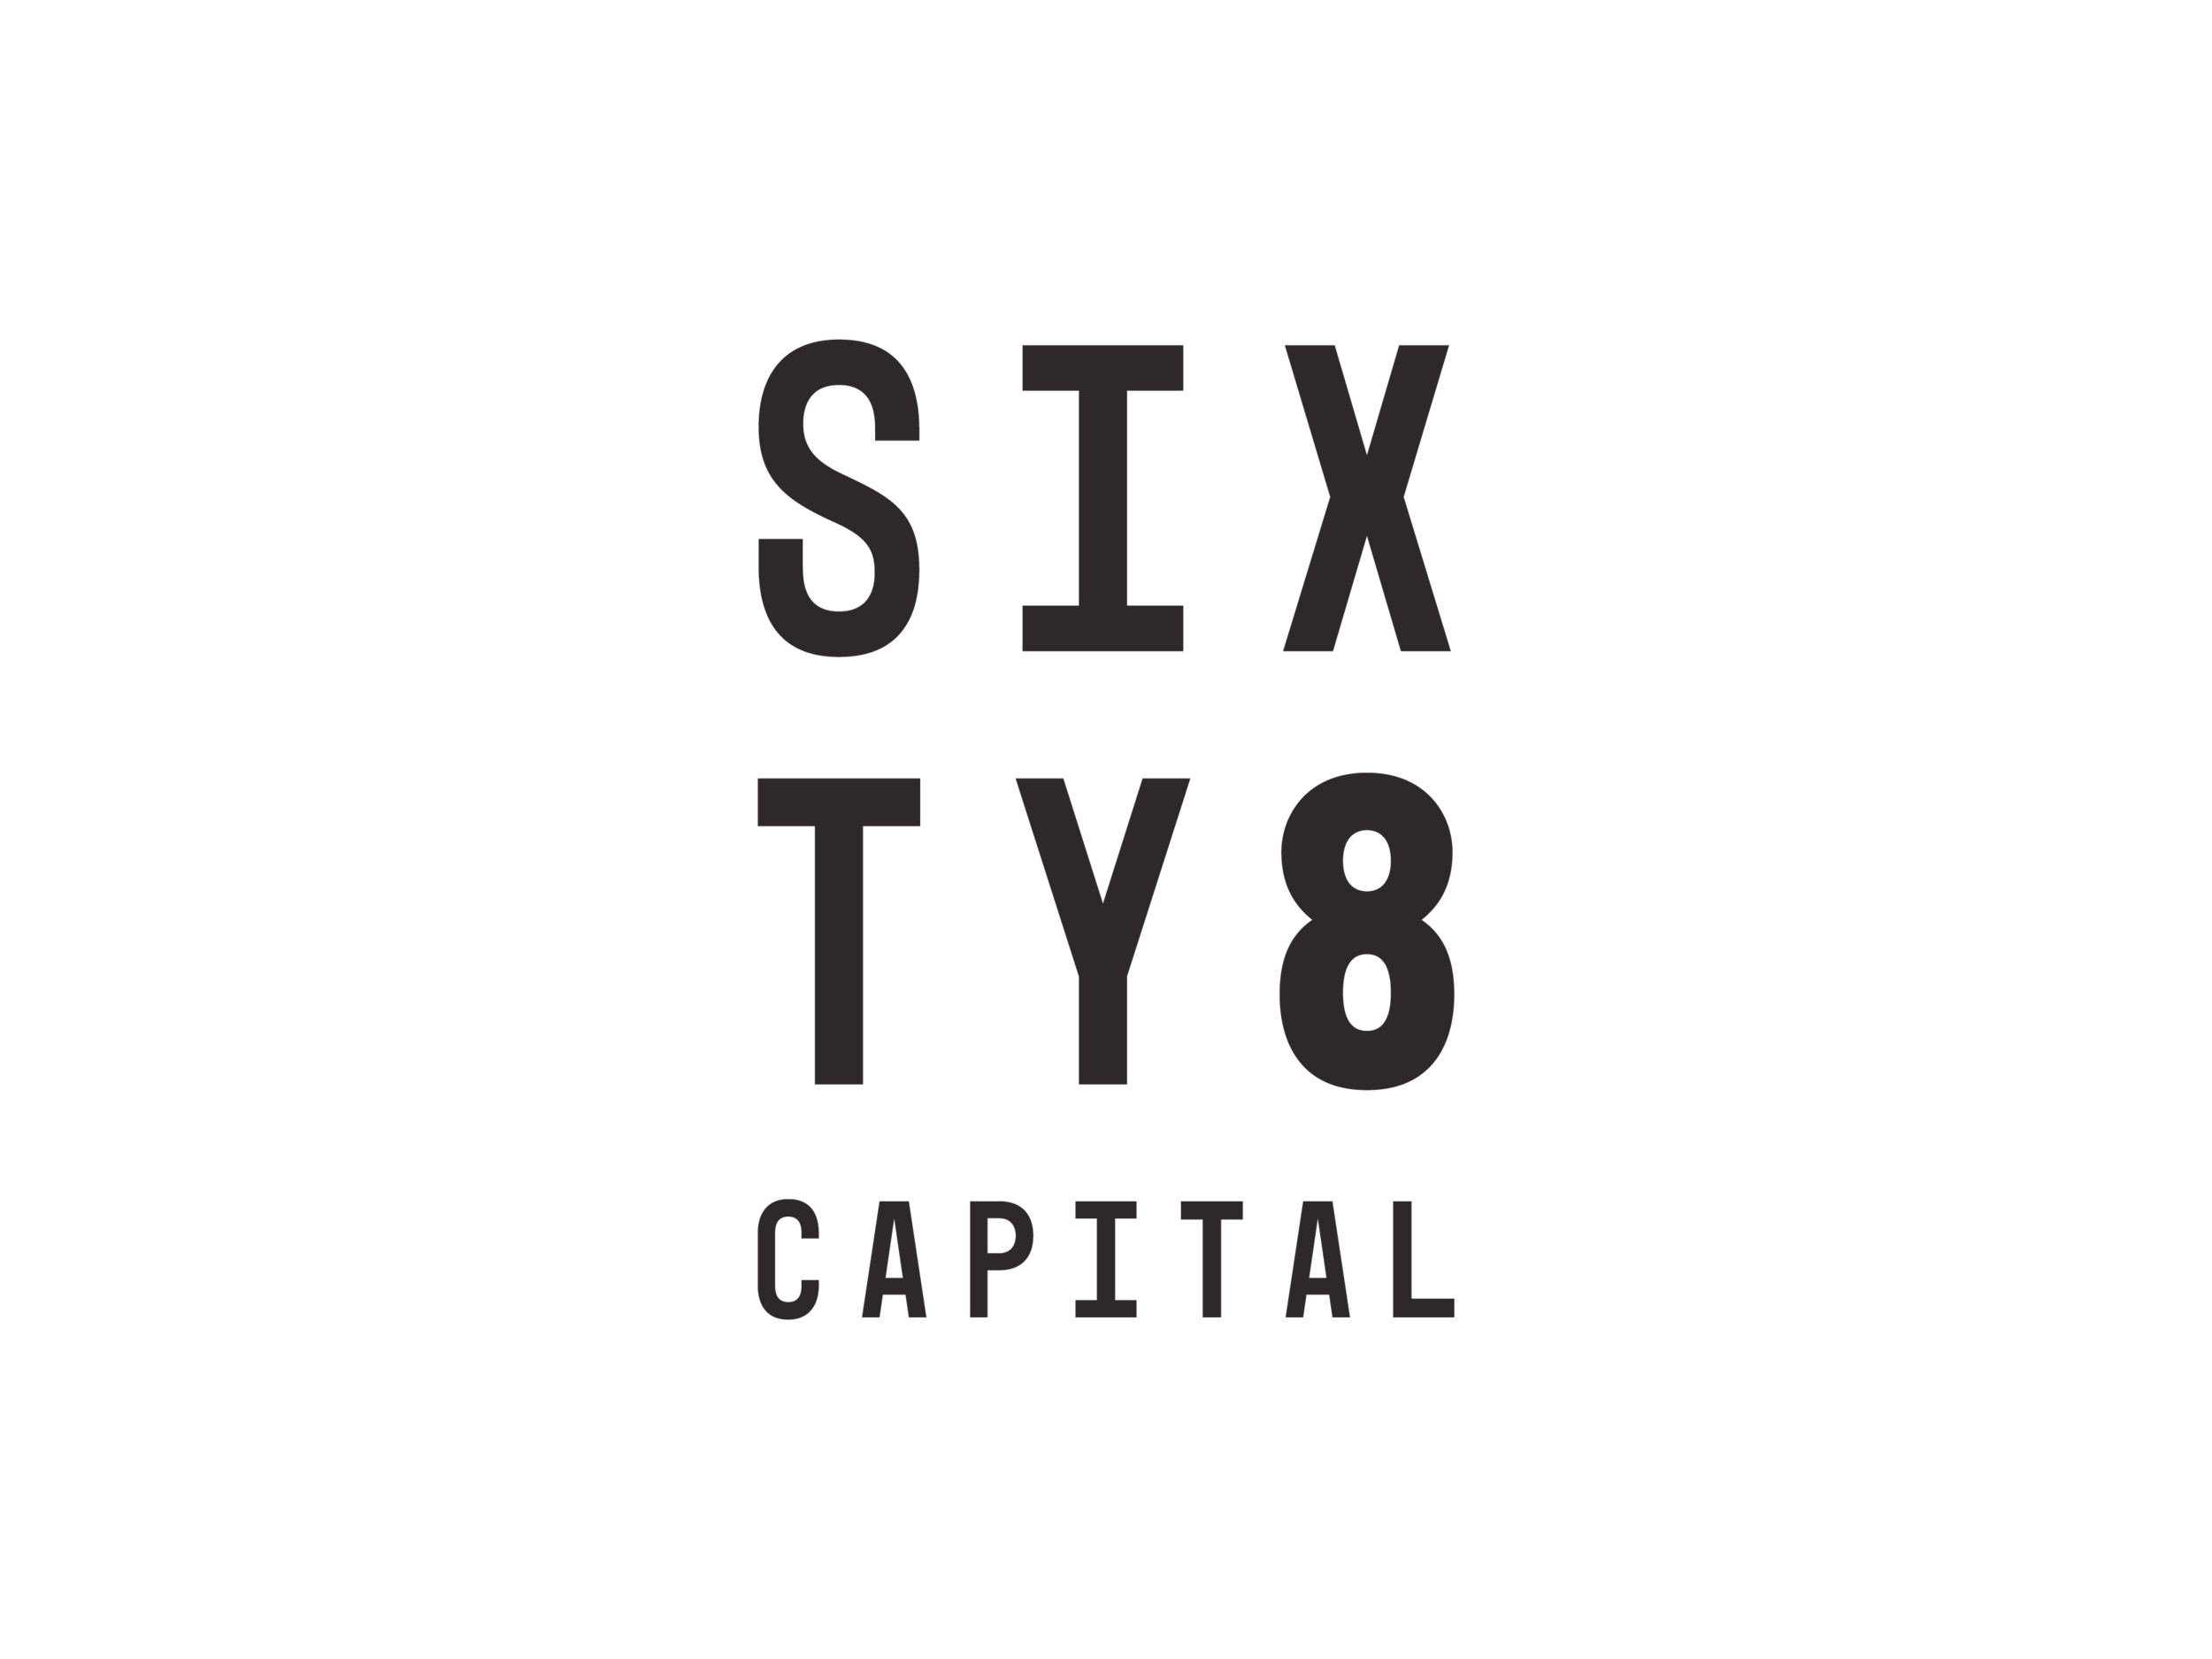 Sixty8 Capital-750px-01.png